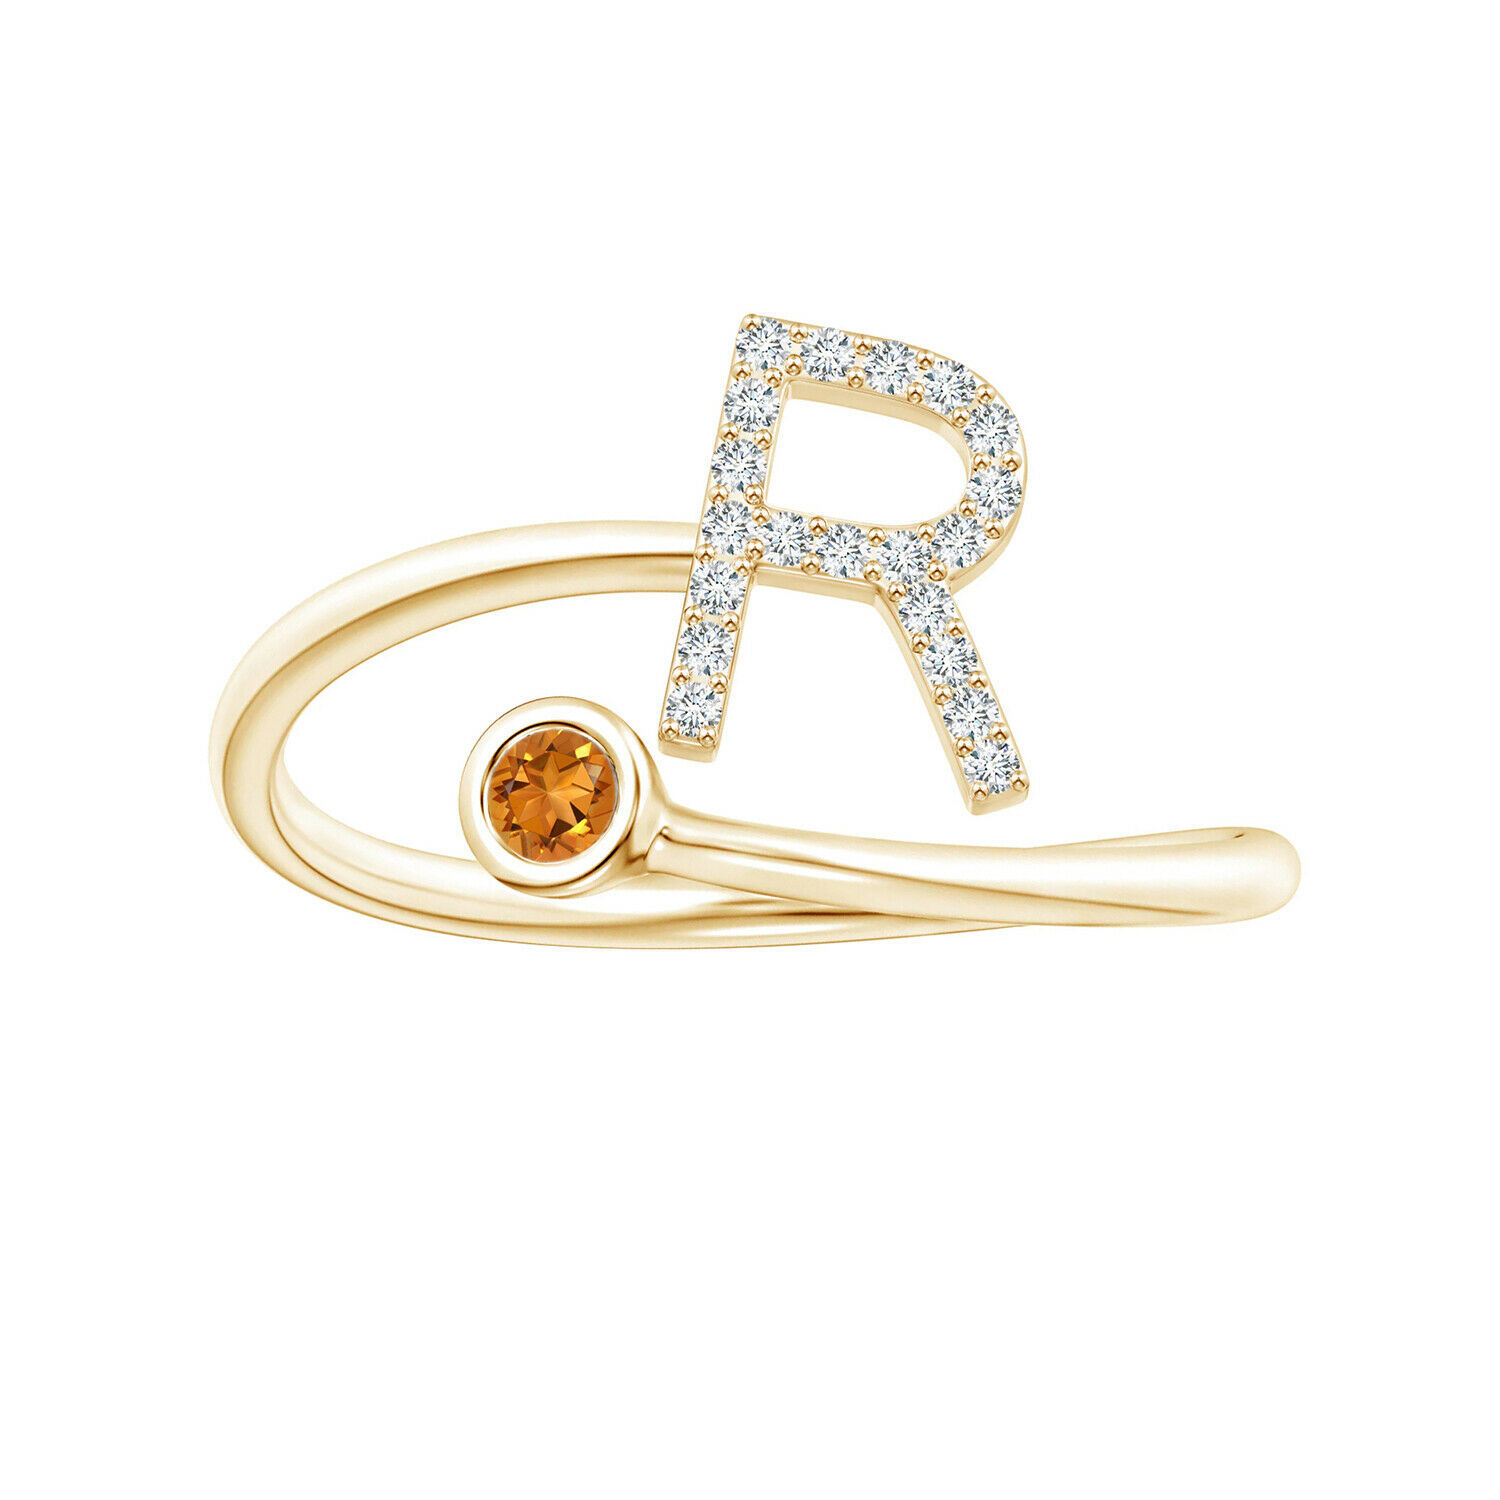 Capital R Initial Personalized Citrine Gemstone 9K Yellow Gold Adjustable Ring